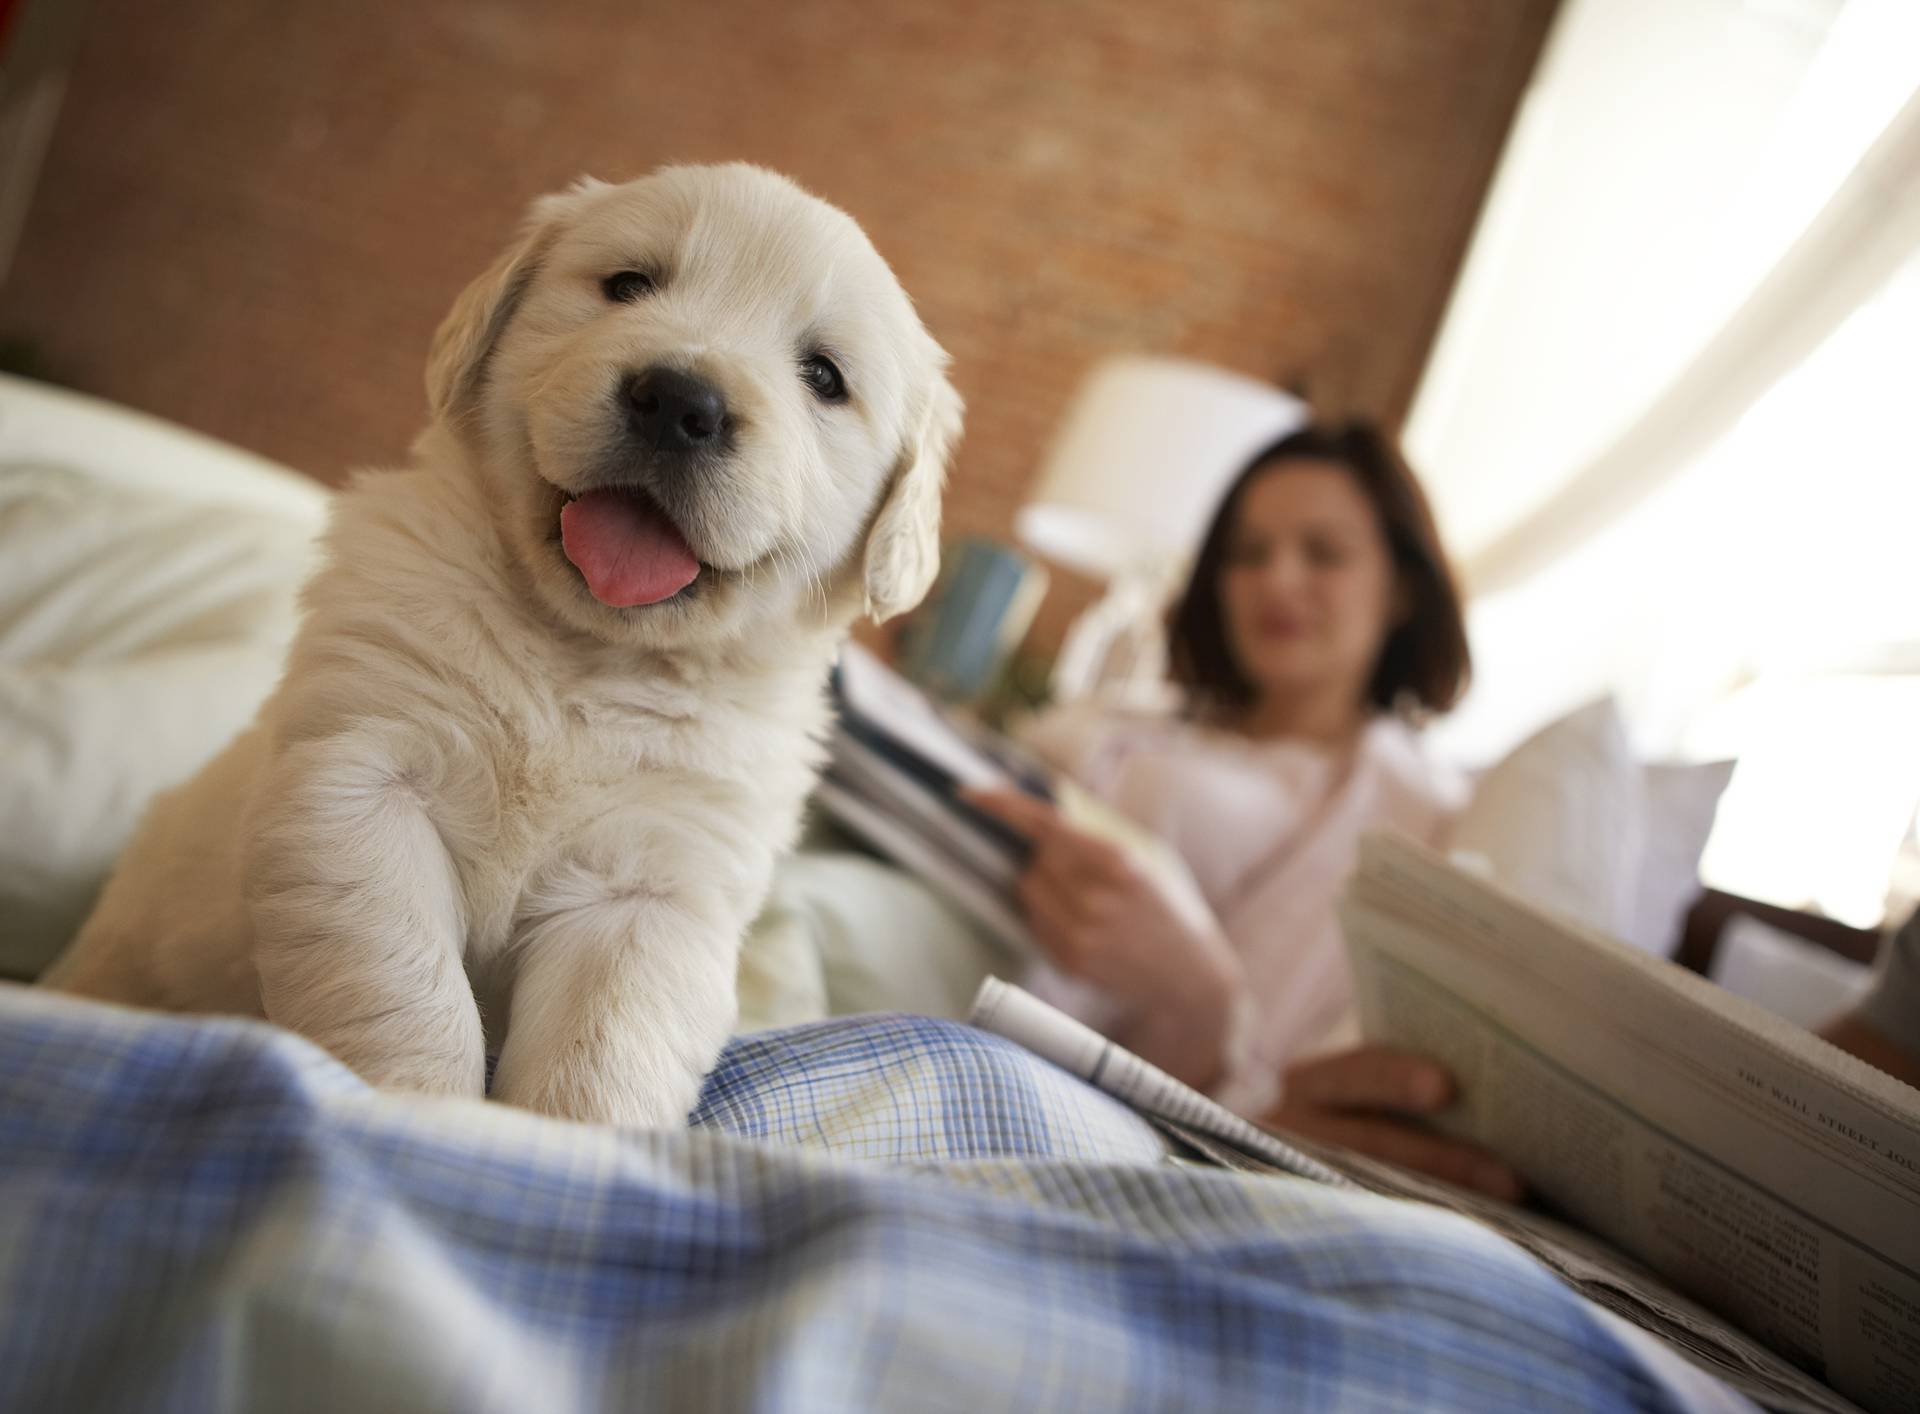 Golden retriever puppy sitting on bed, couple reading in background